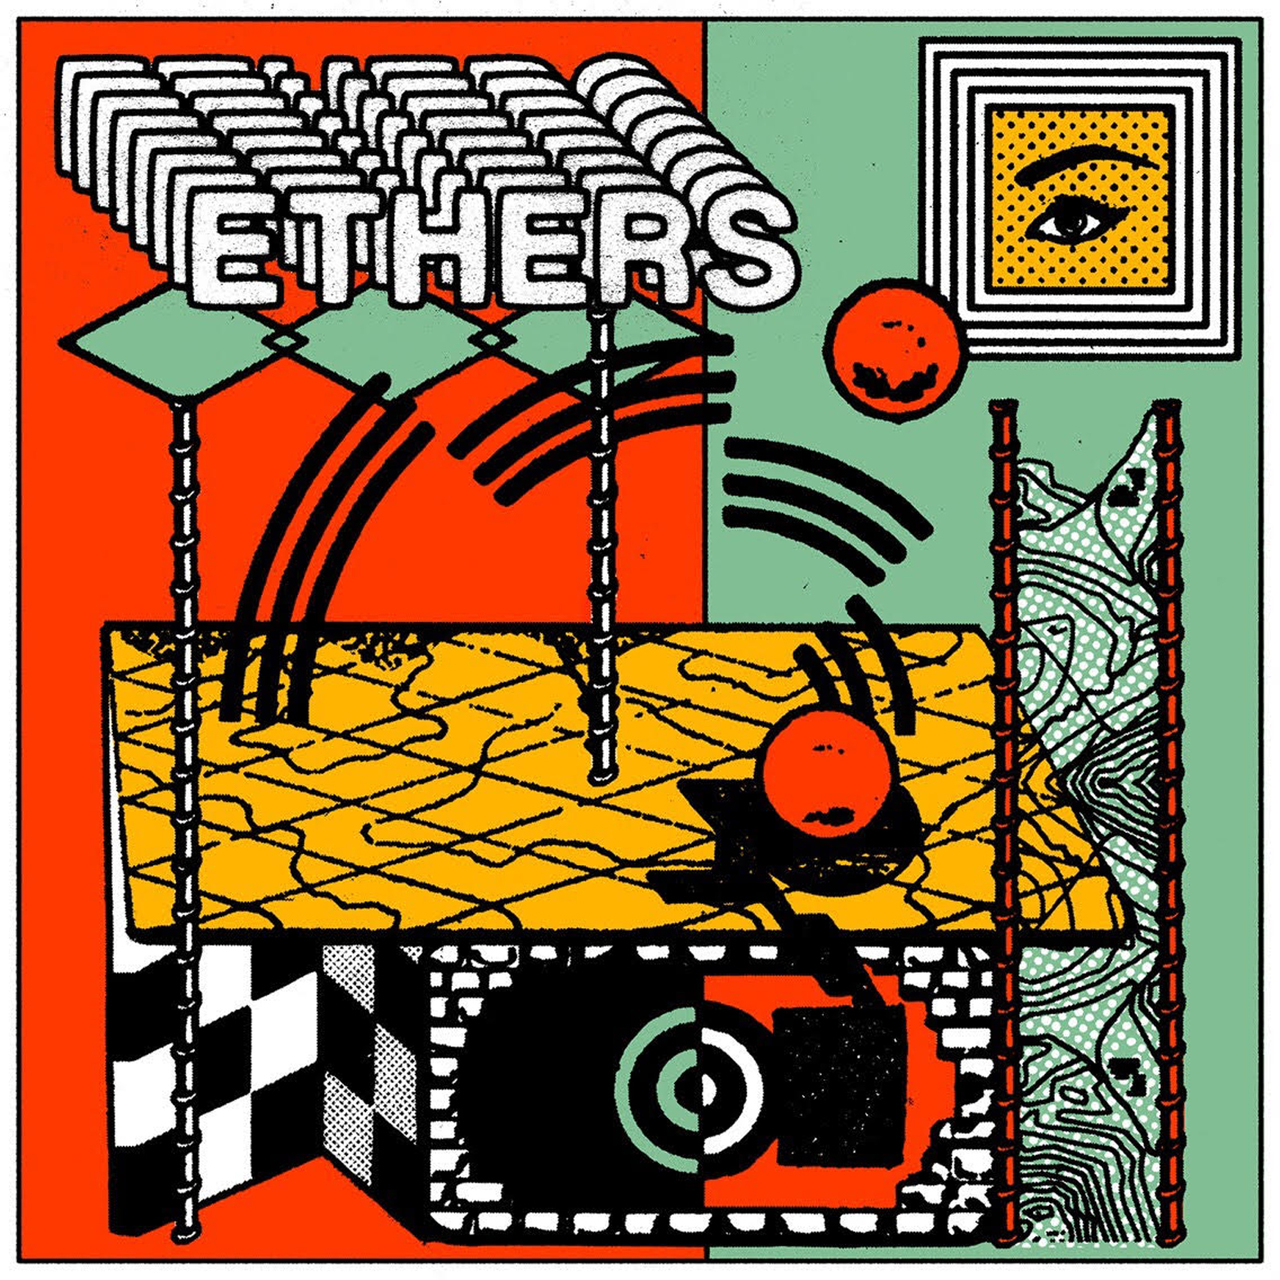 Ethers Ethers